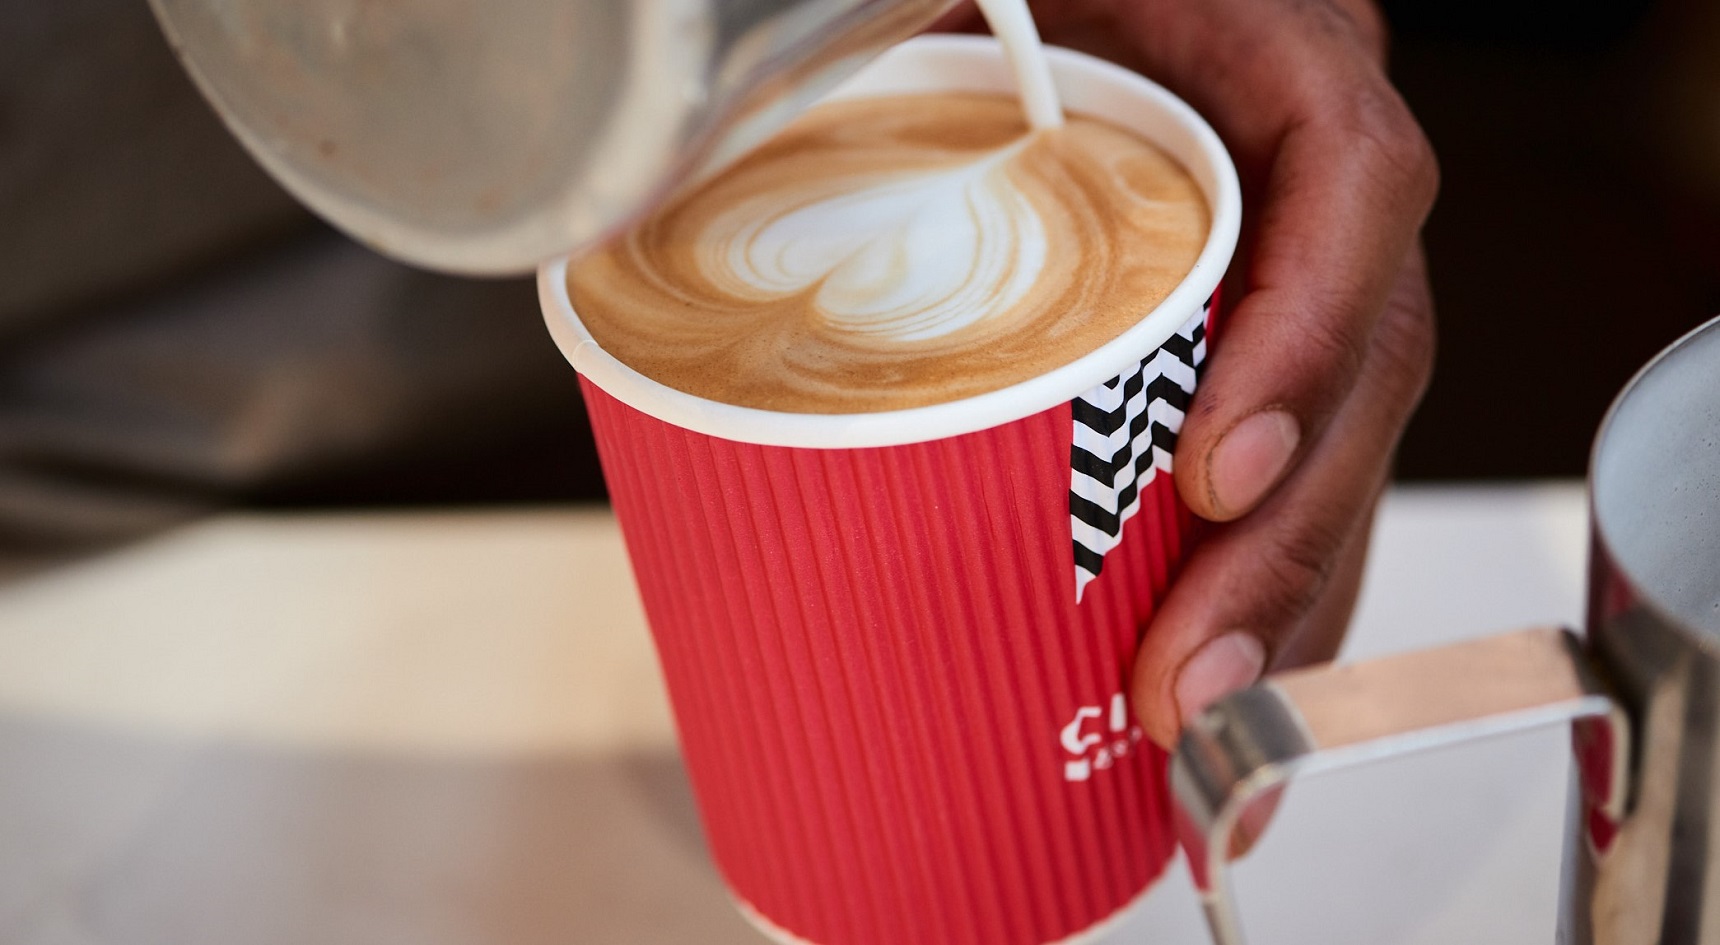 From 29 July, RAA members get one free coffee upgrade per day at CIBO. Image: CIBO.